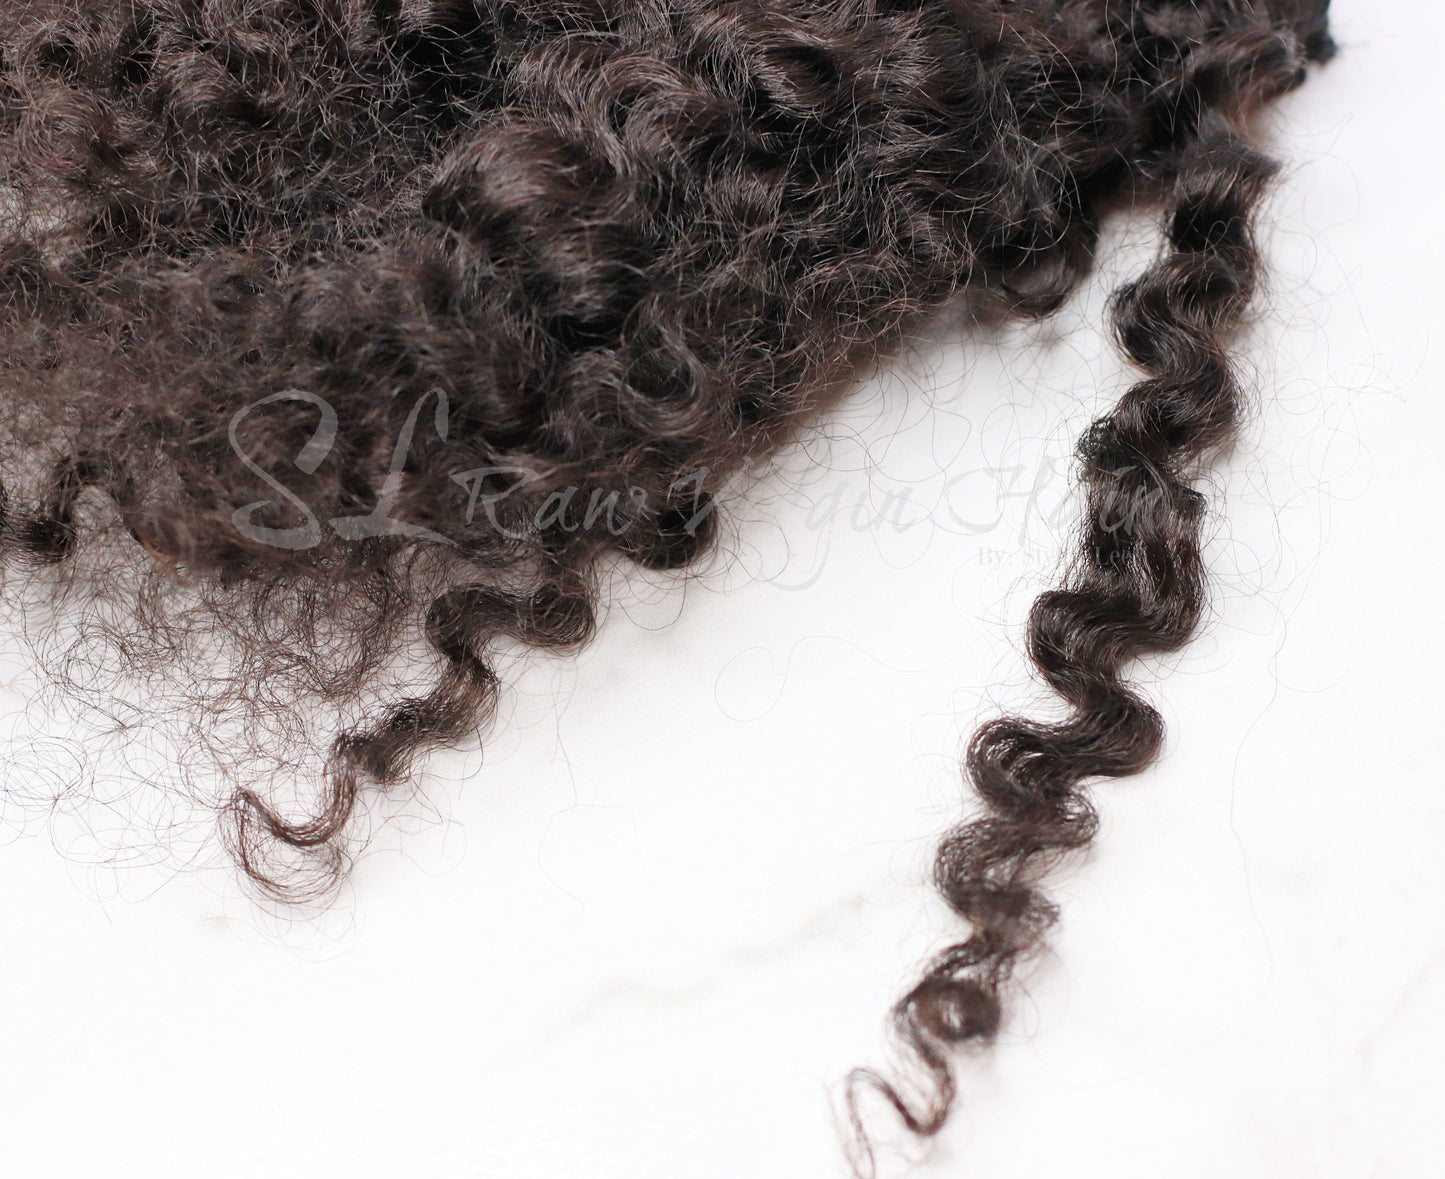 Burma hair curly swatch matches curl patter 3a-3c. Perfect curly for any season. Ony sold by SL Raw Virgin Hair in 100 gram bundles. SL Raw Virgin hair 